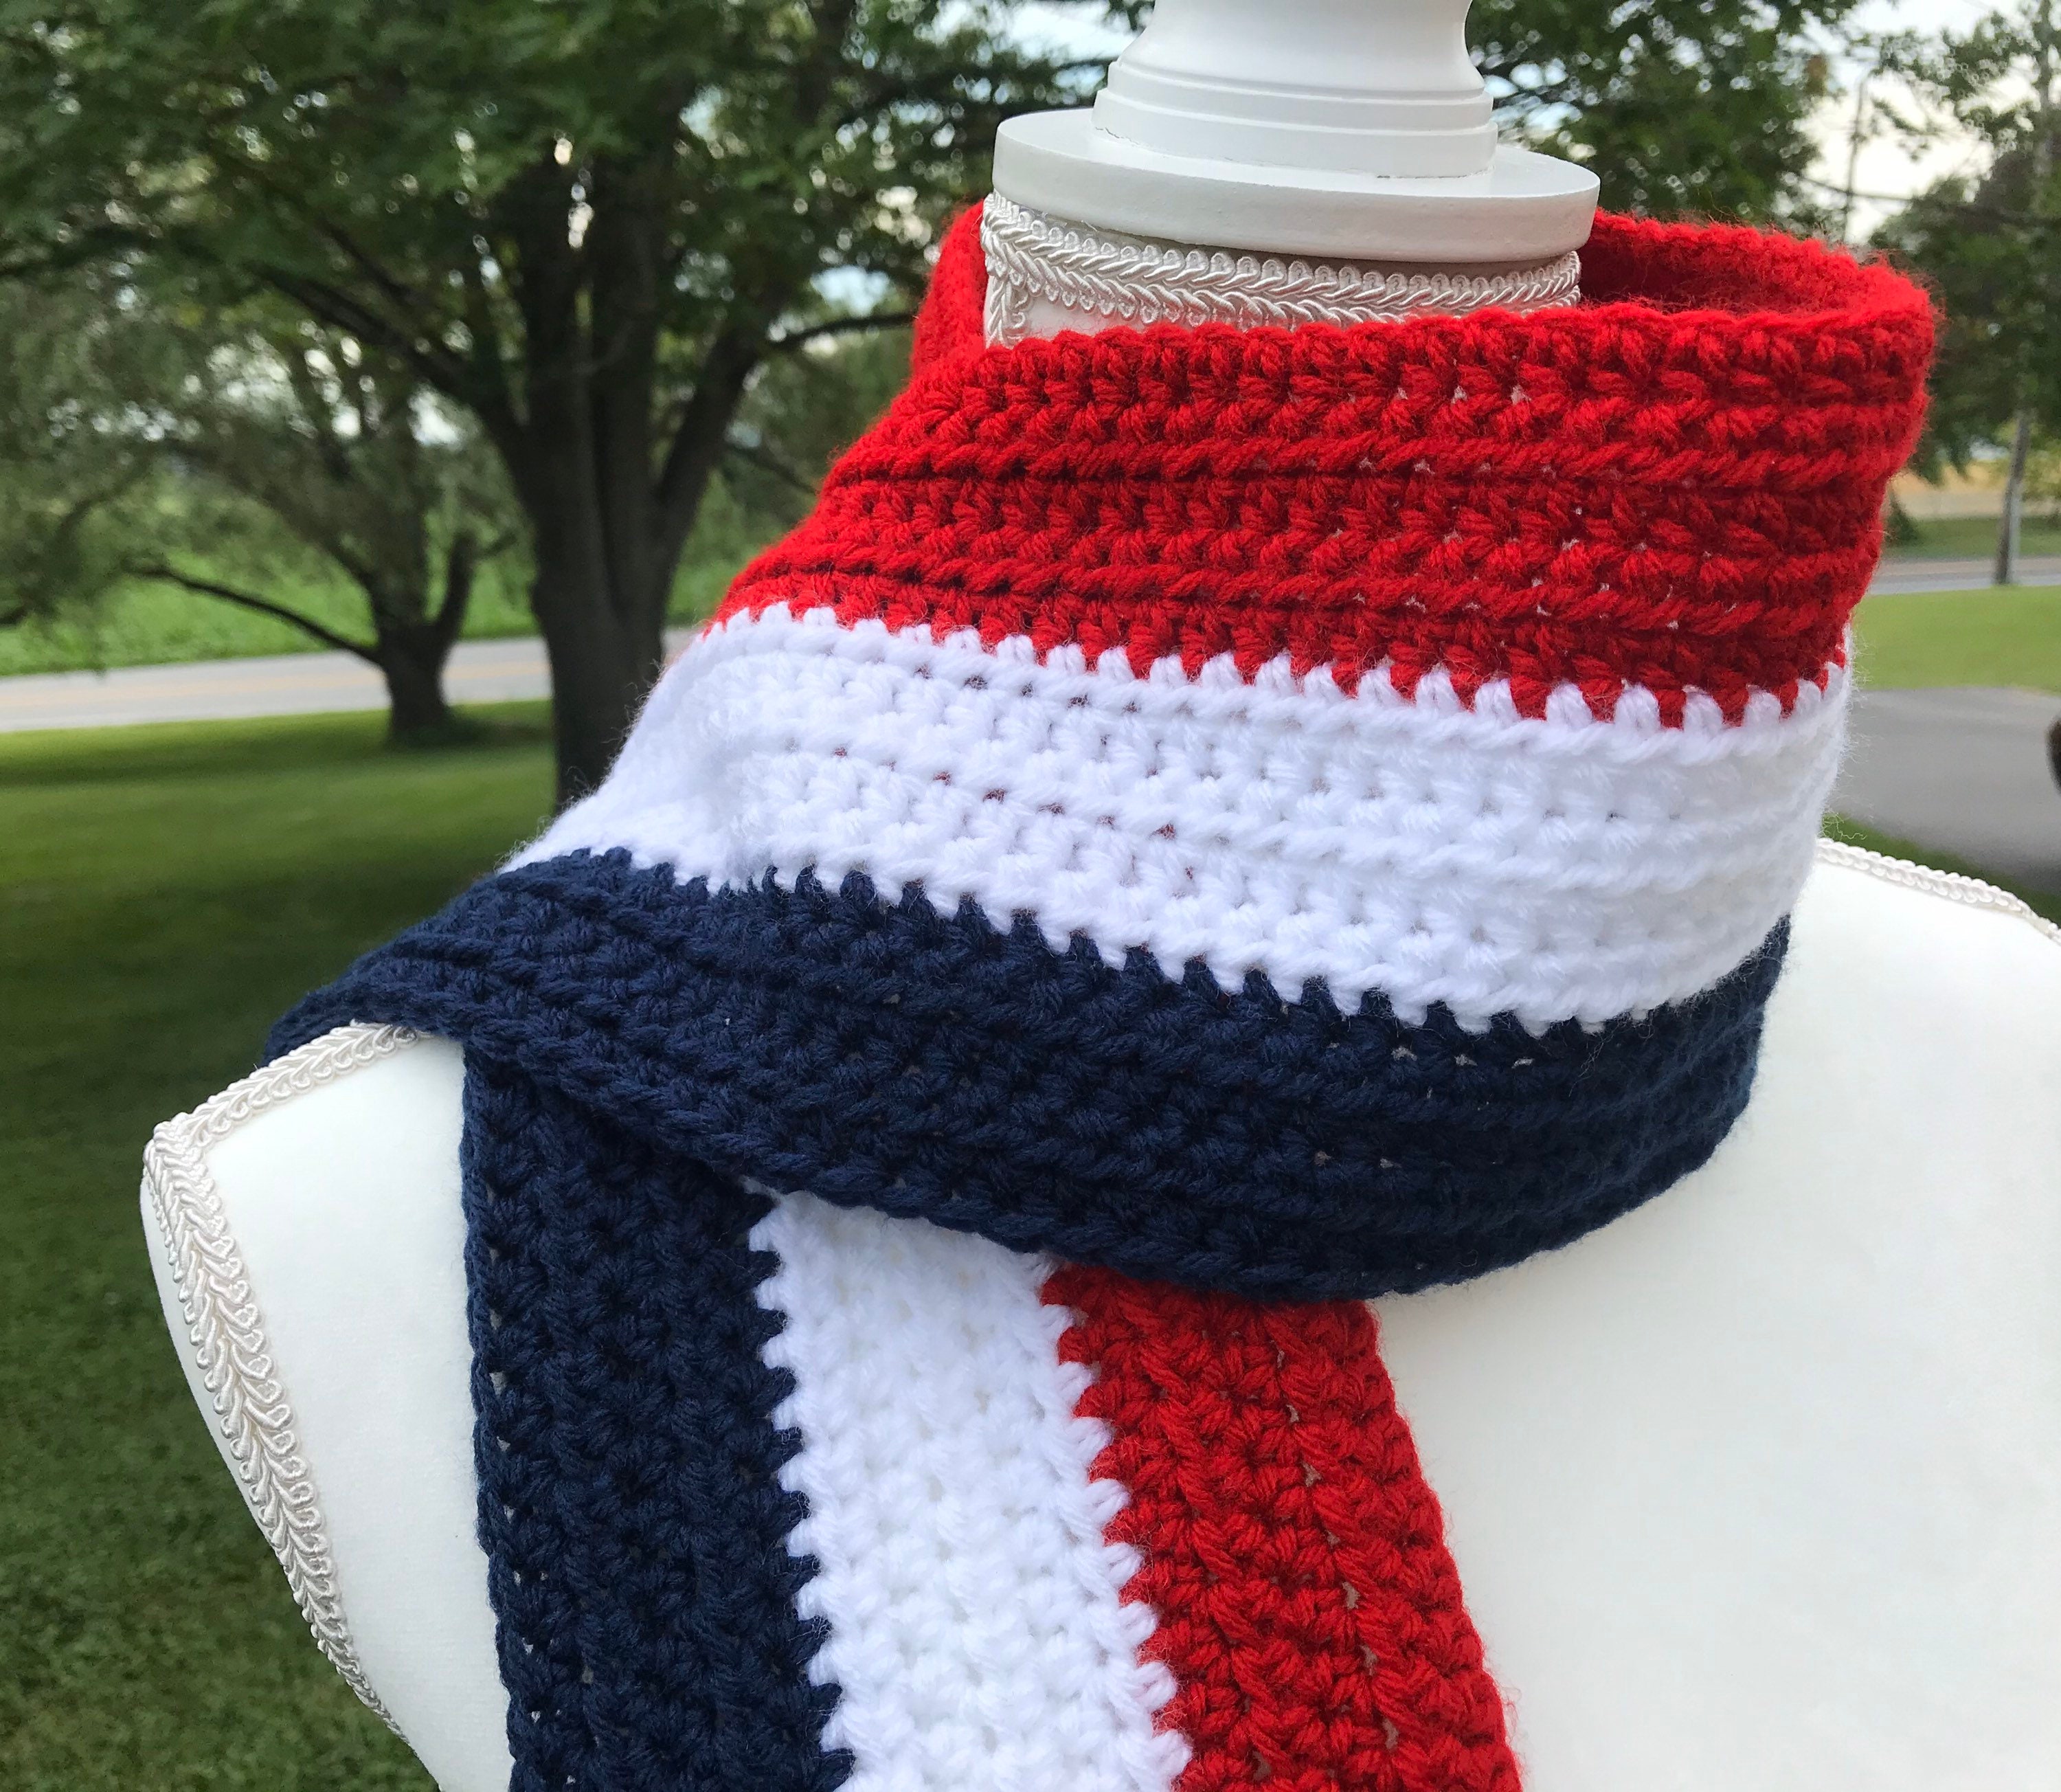 Men, Scarf, Crochet Blue Scarf, Women, Scarf Scarf, and Scarf Flag - Scarf, Scarf, White Red Striped Etsy Handmade Winter Patriotic Scarf Knit